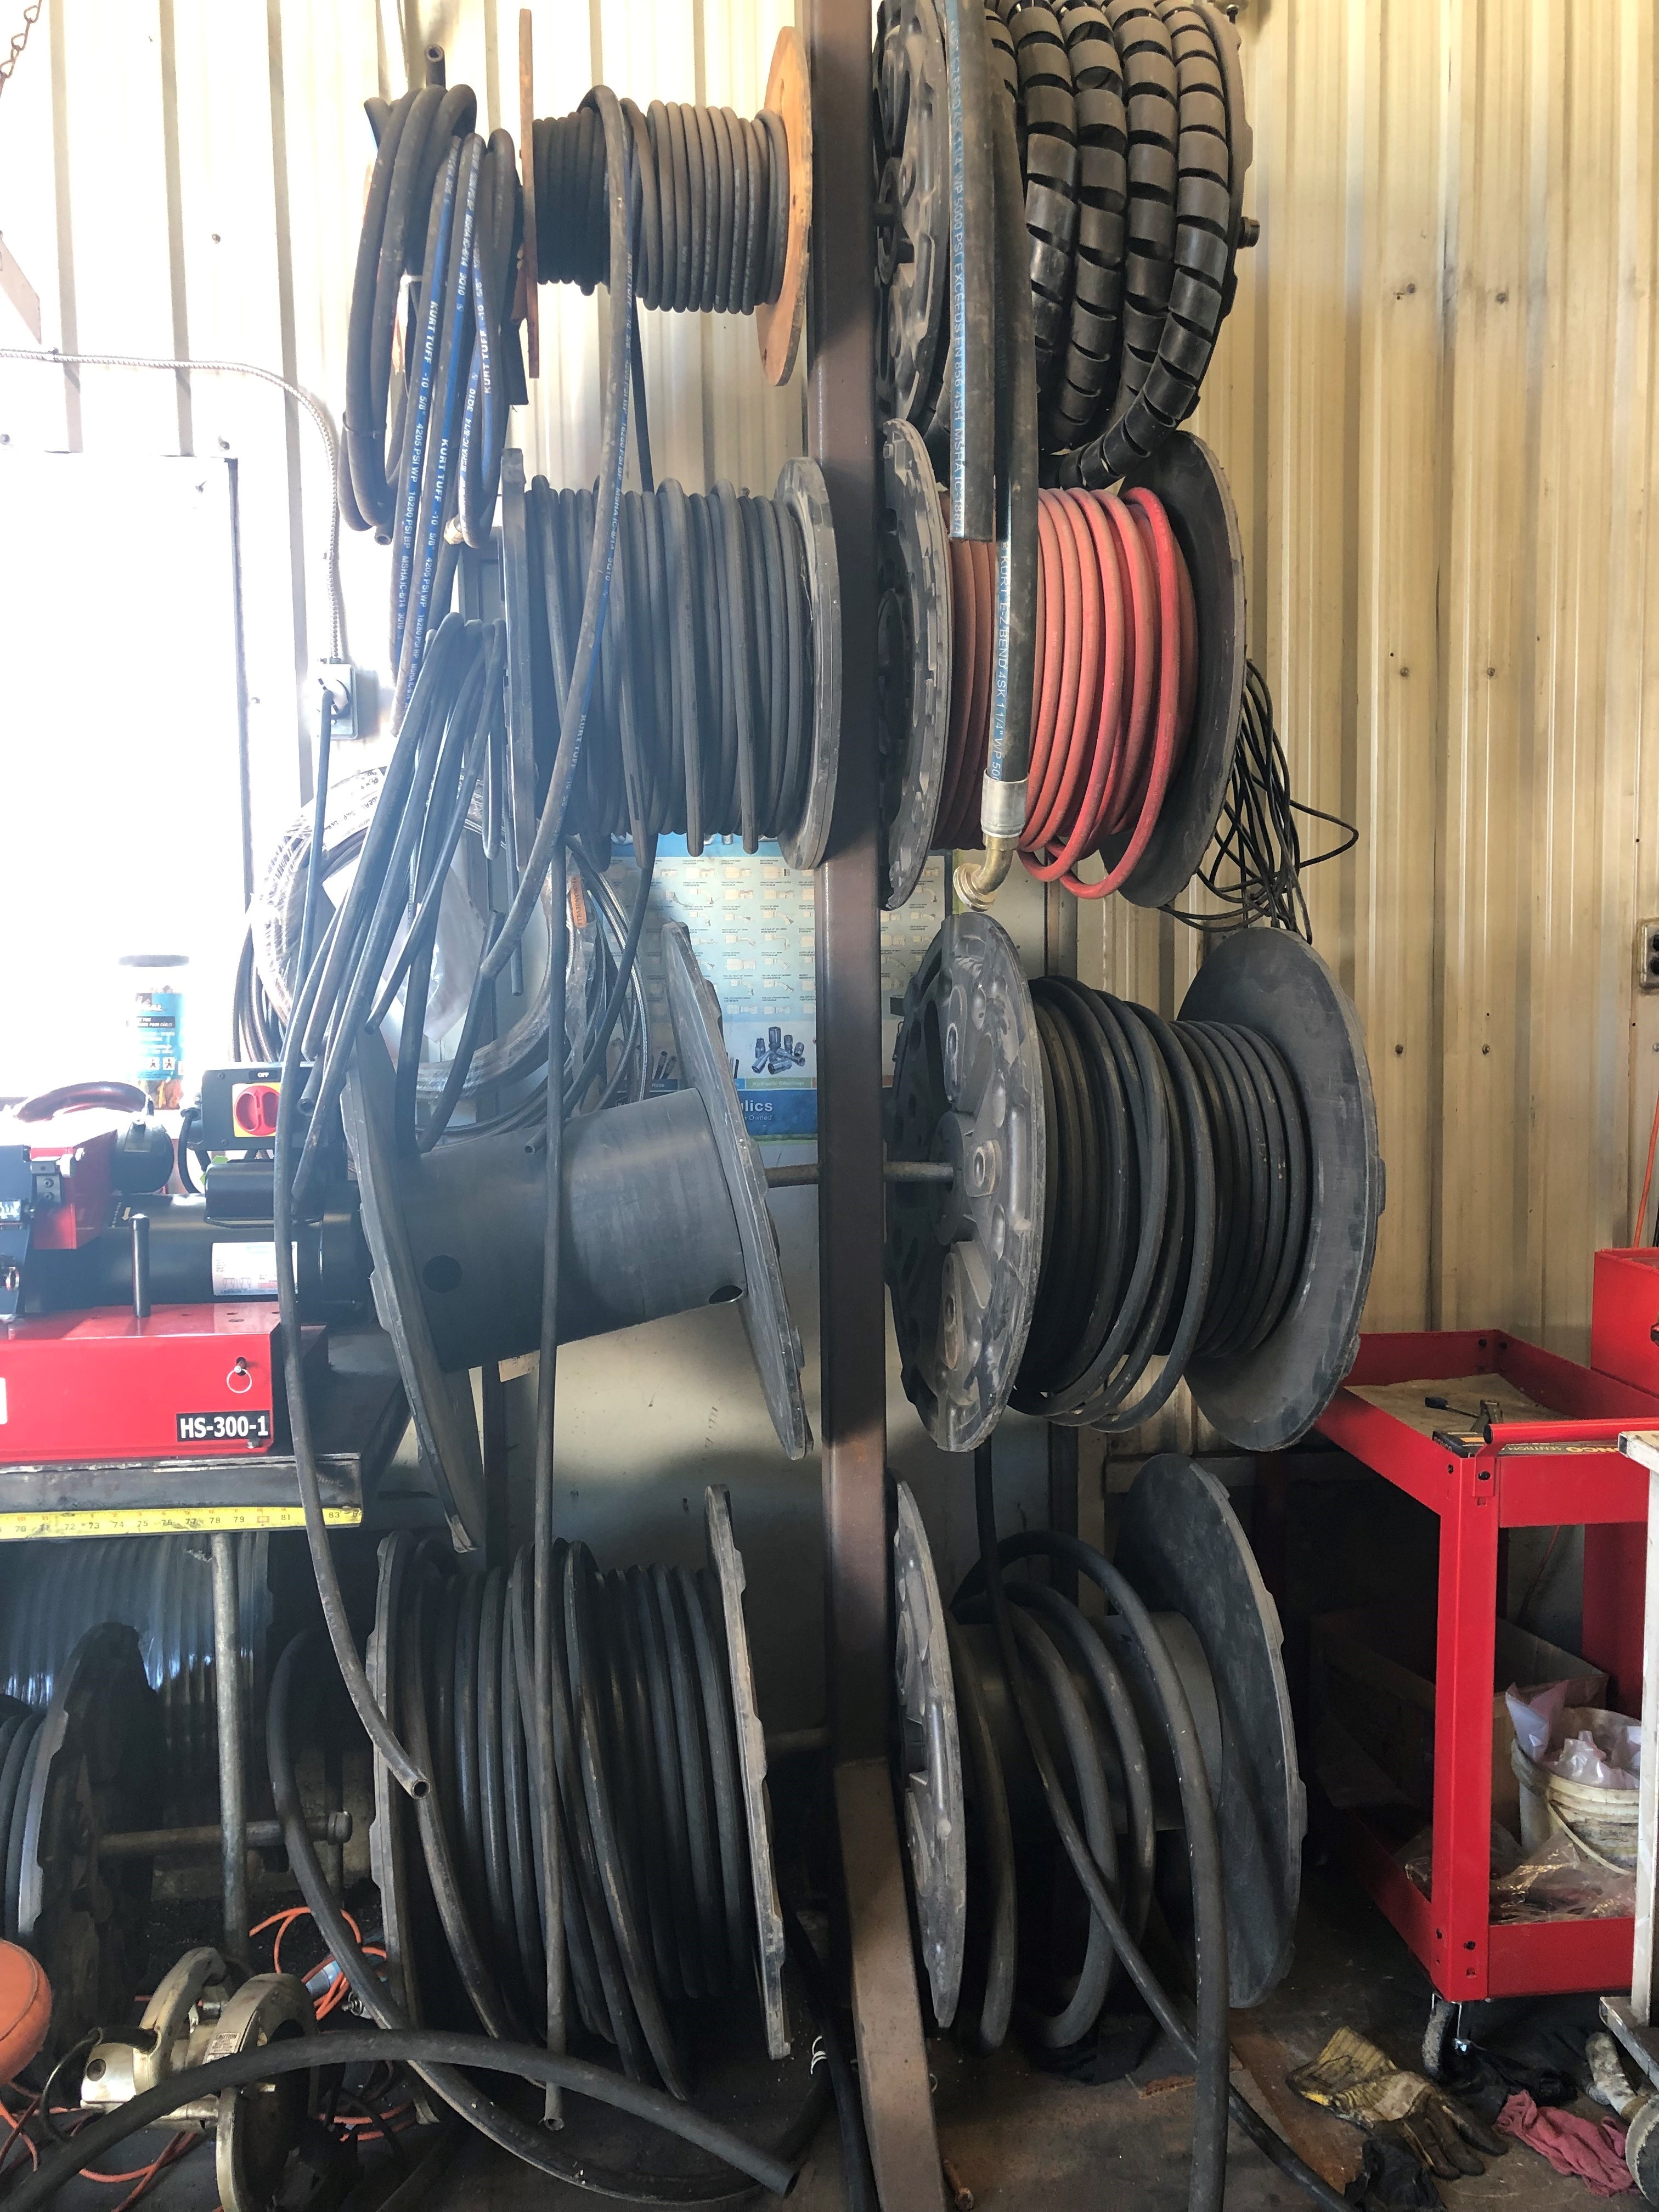 Did some one ask for hydraulic hoses in many sizes? We have them all.